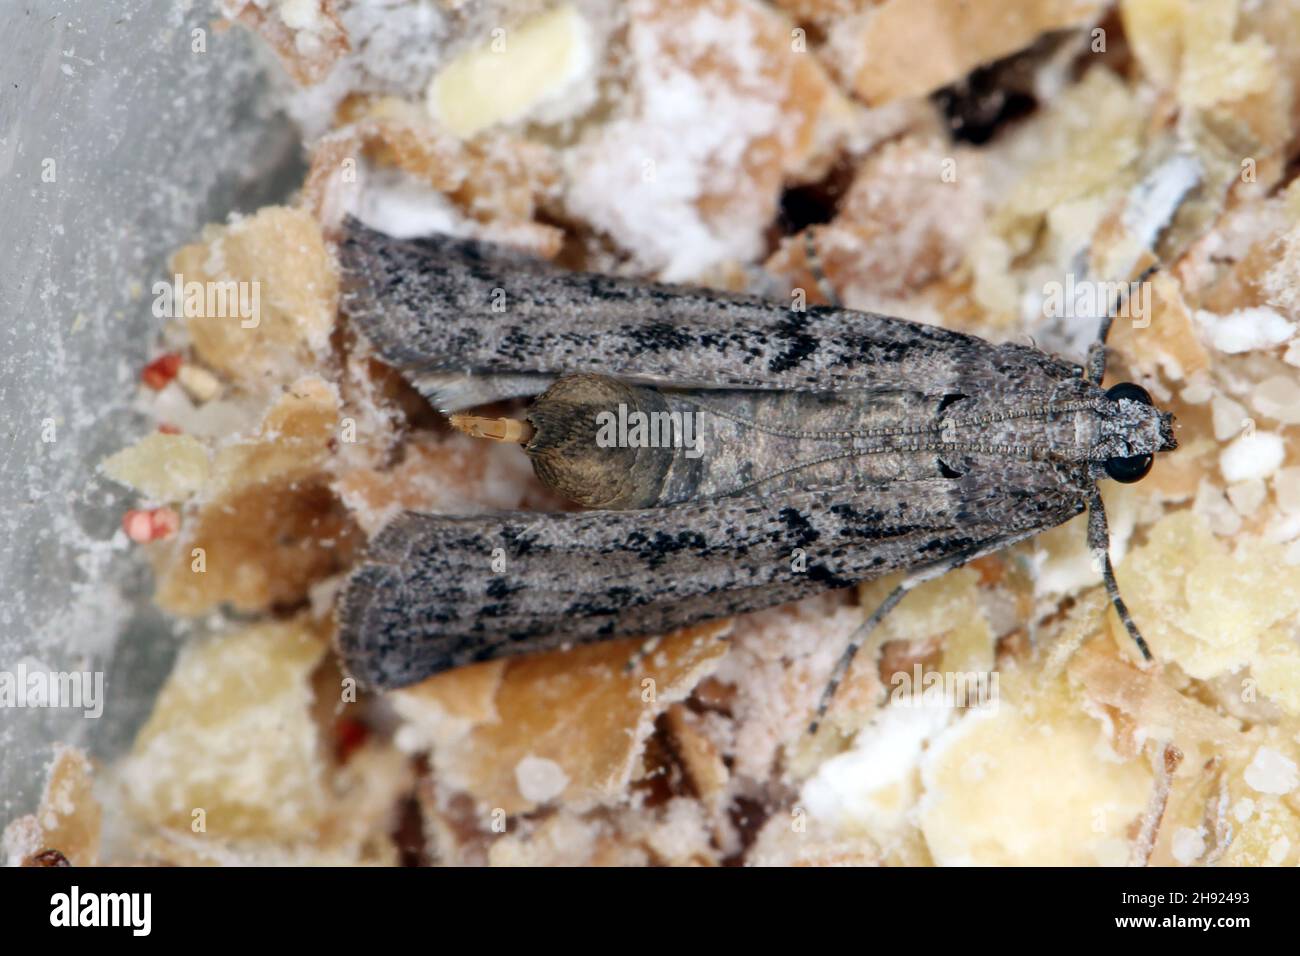 The Mediterranean flour moth or mill moth (Ephestia kuehniella) is a moth of the family Pyralidae. It is a common pest of cereal grains and products. Stock Photo